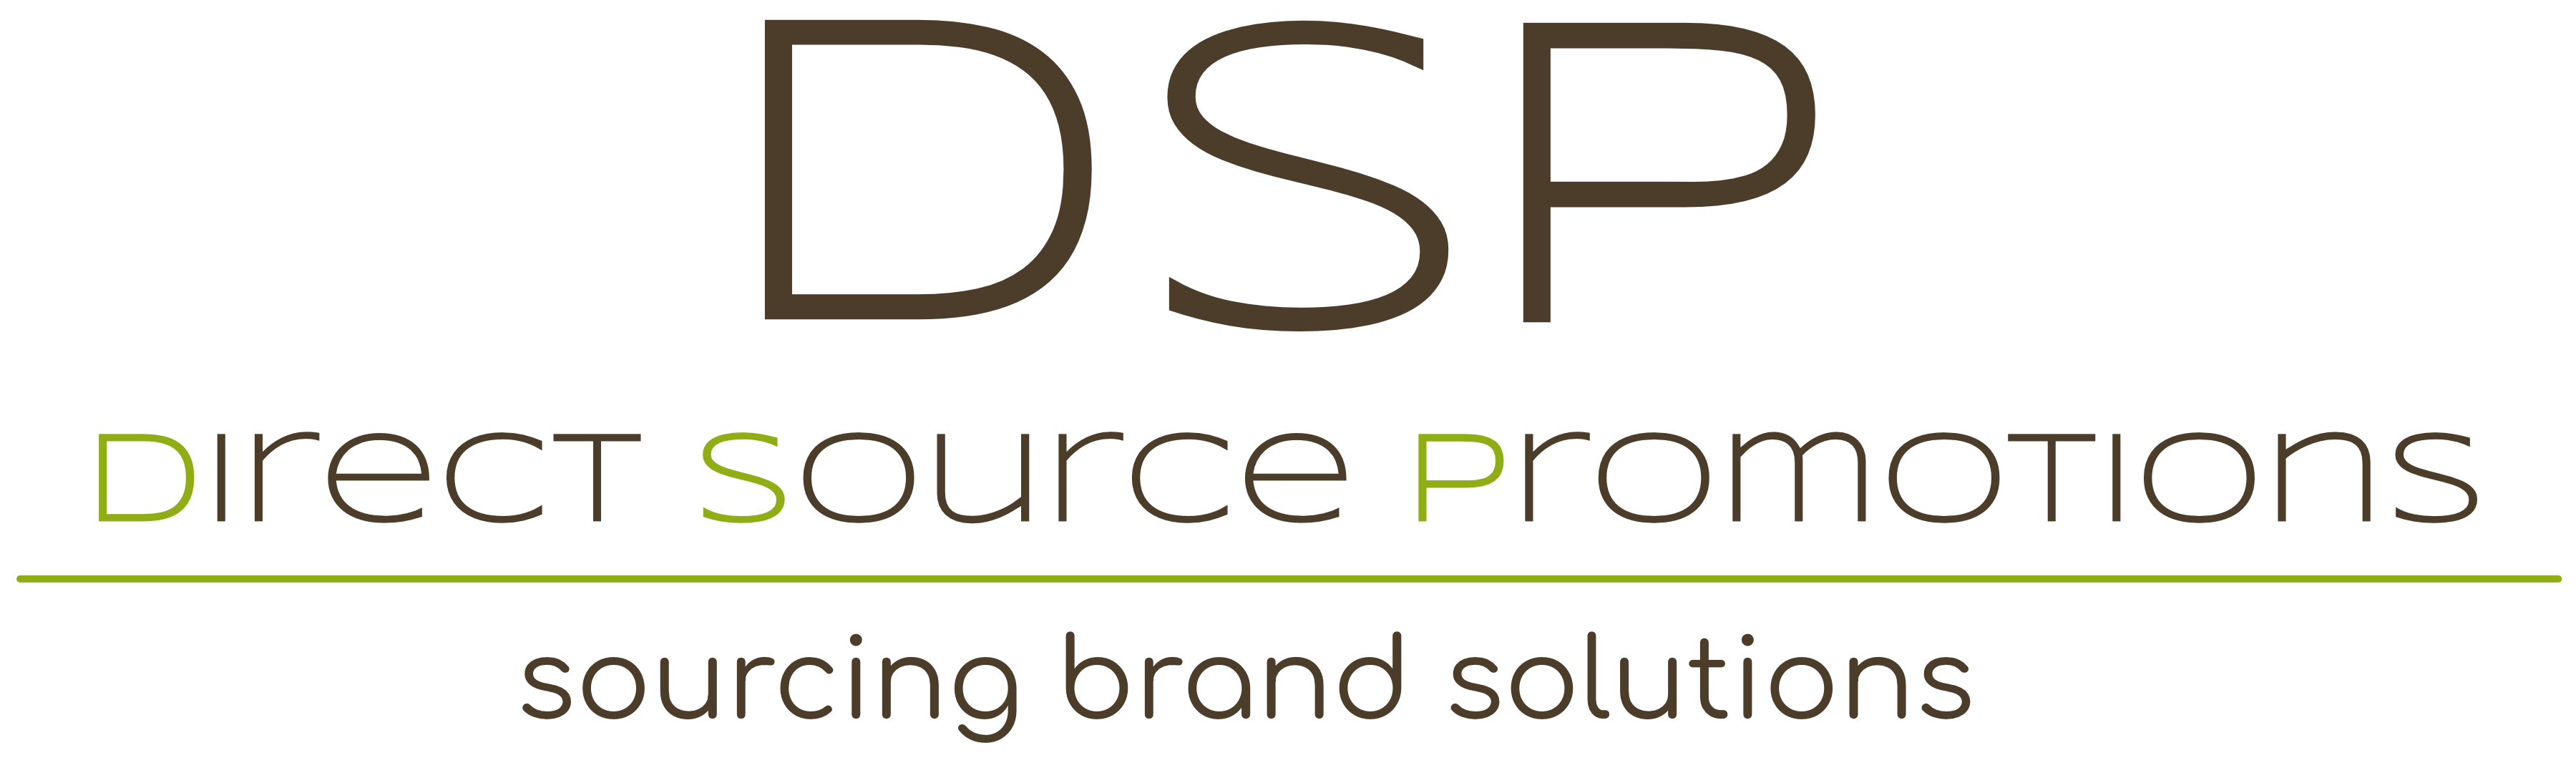 DSP Direct Source Promotions's Logo